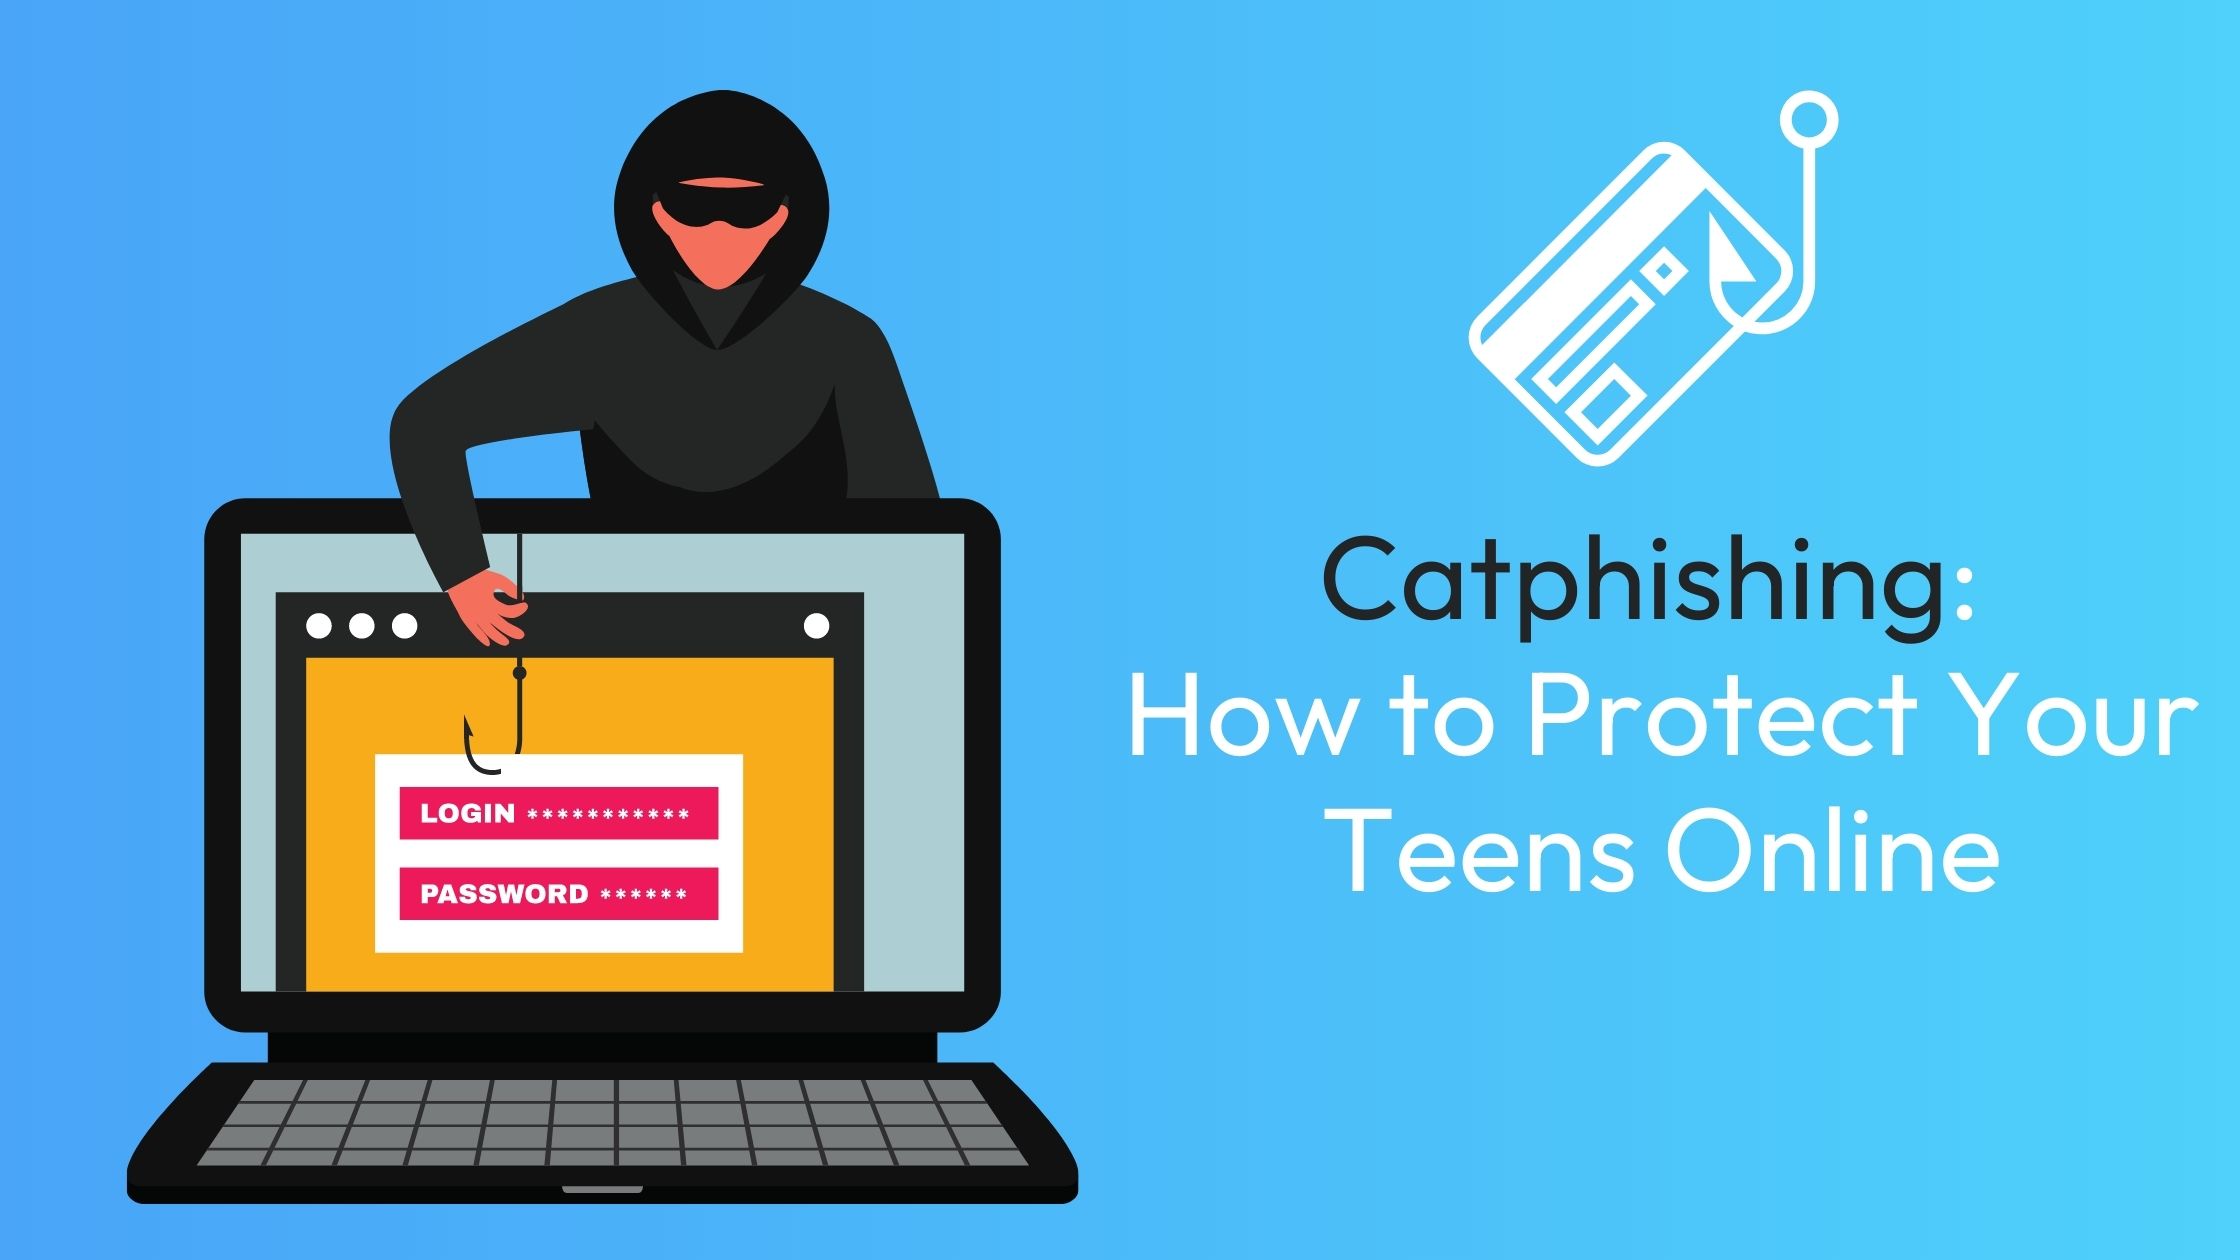 Catfishing: How to Protect Your Teens Online - Kidas